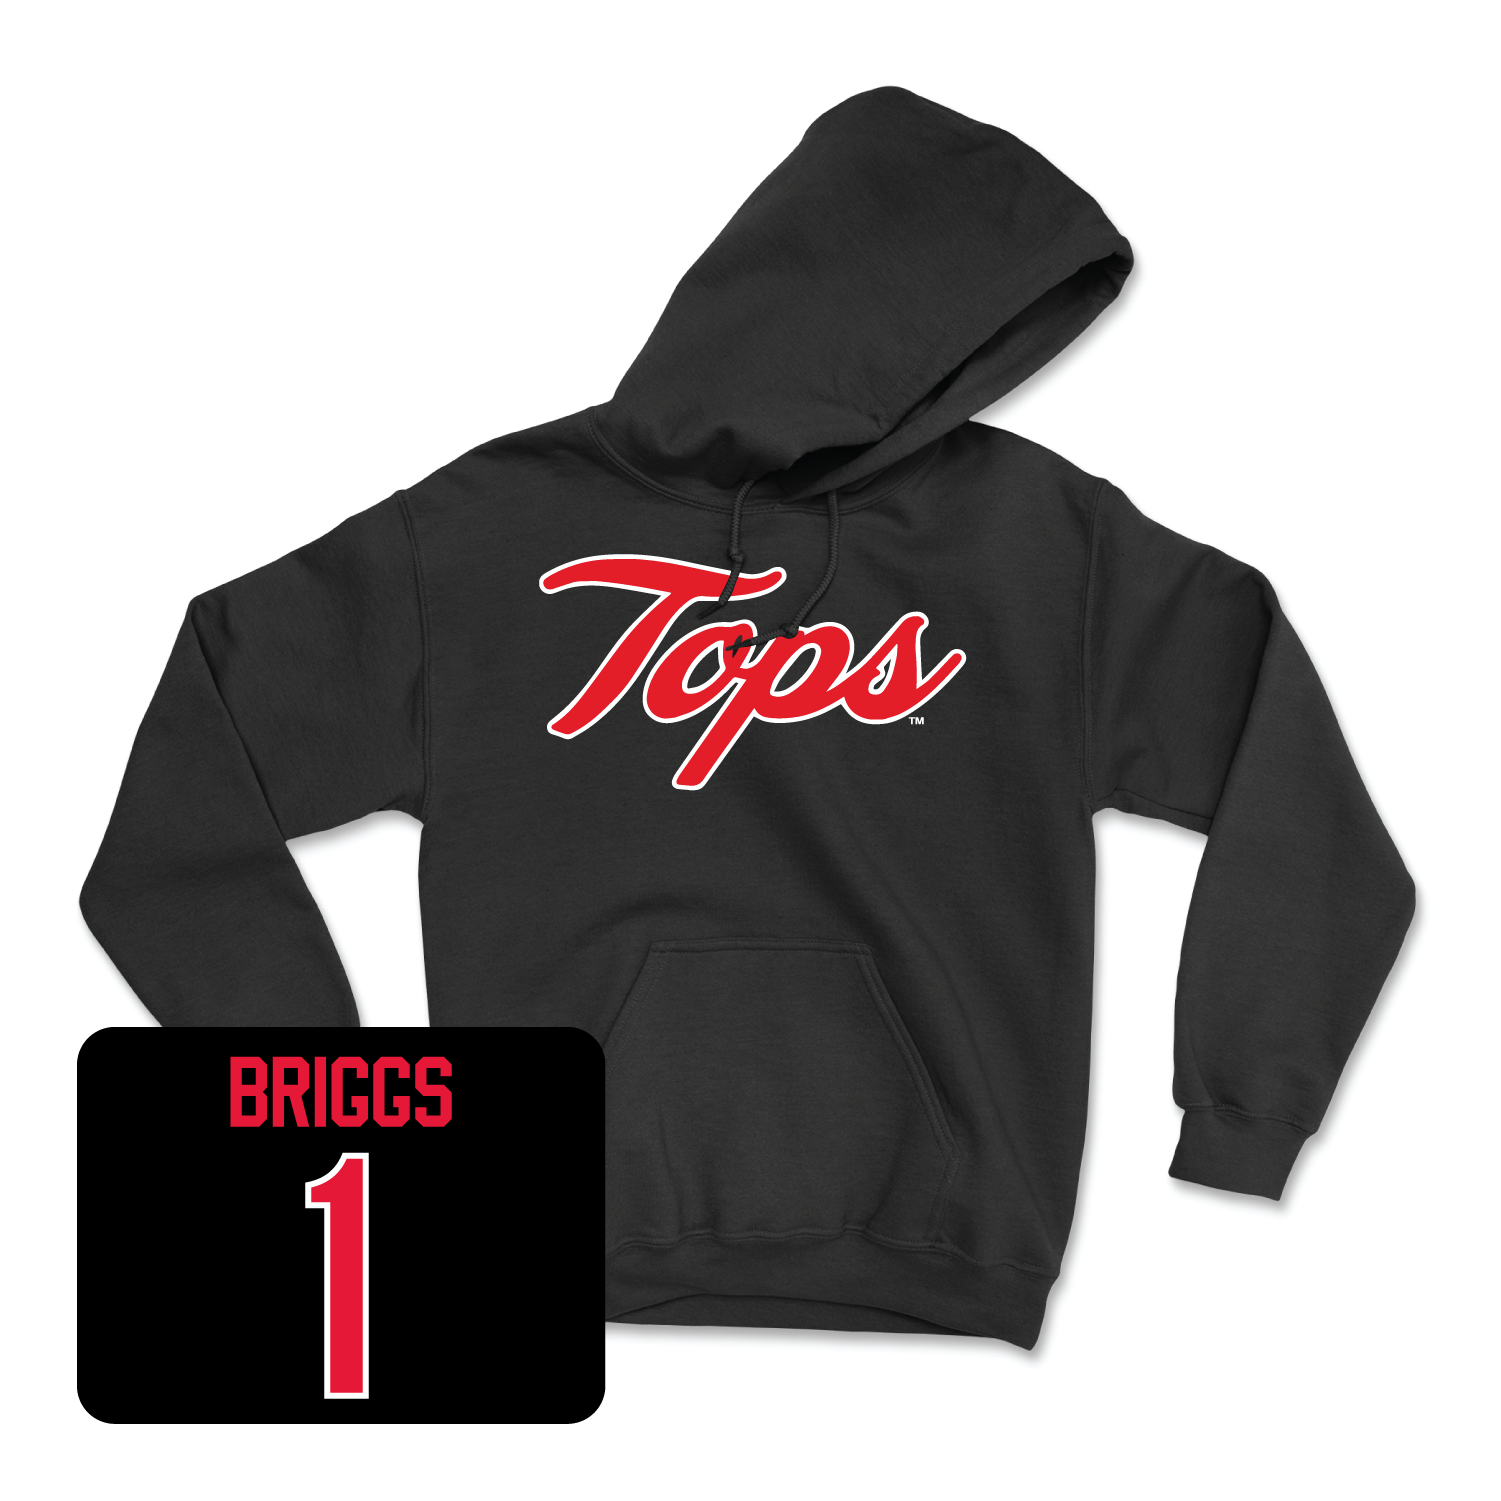 Black Women's Volleyball Tops Hoodie Youth Small / Paige Briggs | #1